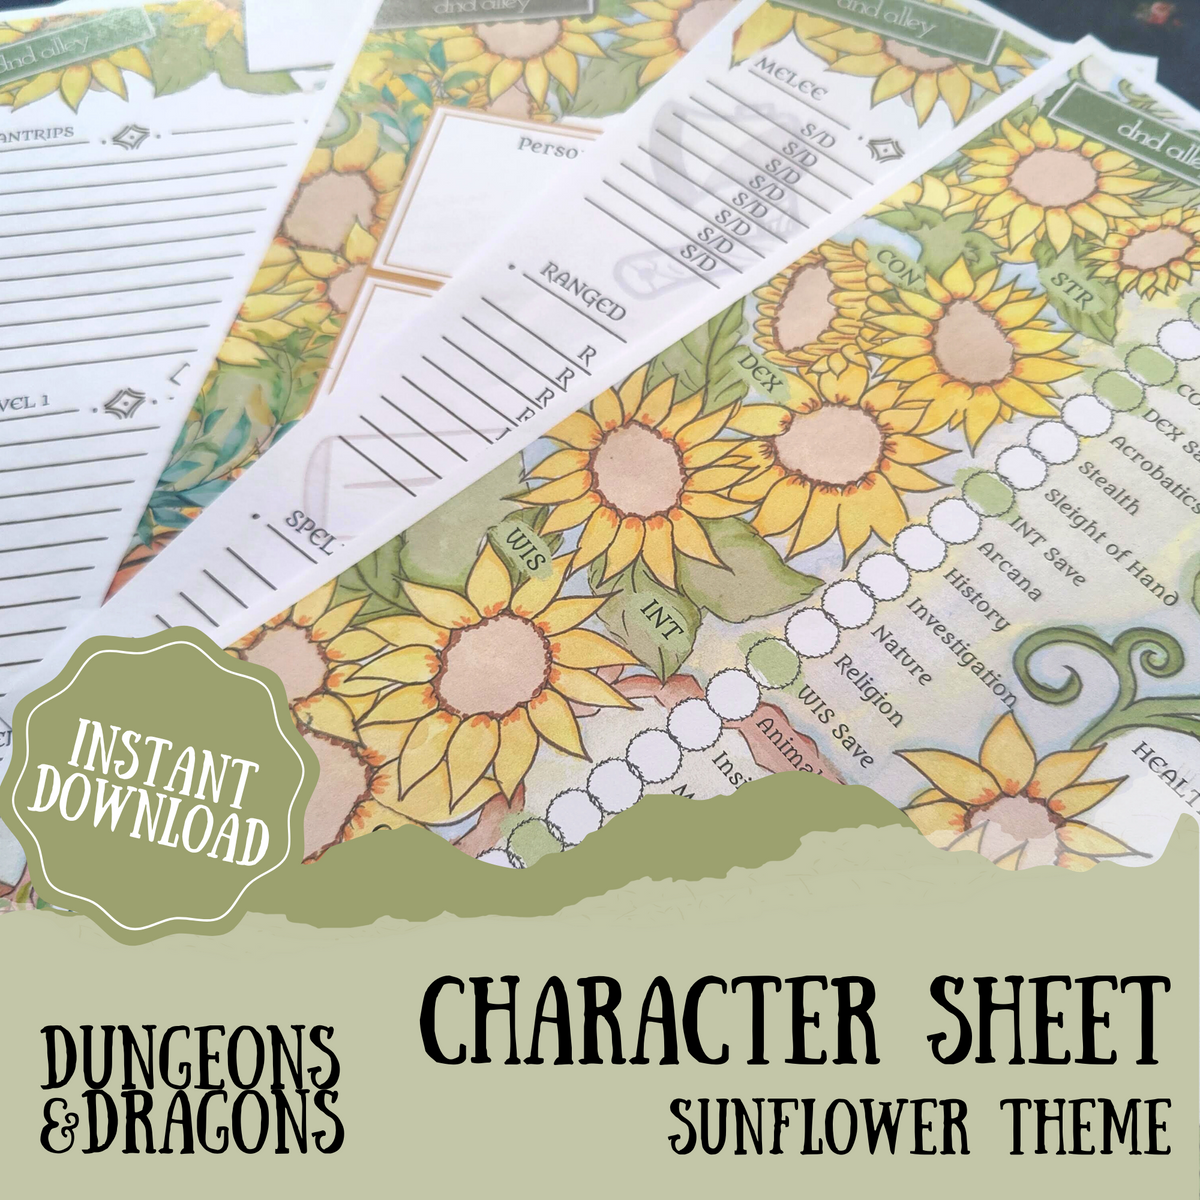 DnD Character Sheet | D&D Resources | Great for Dungeons and Dragons